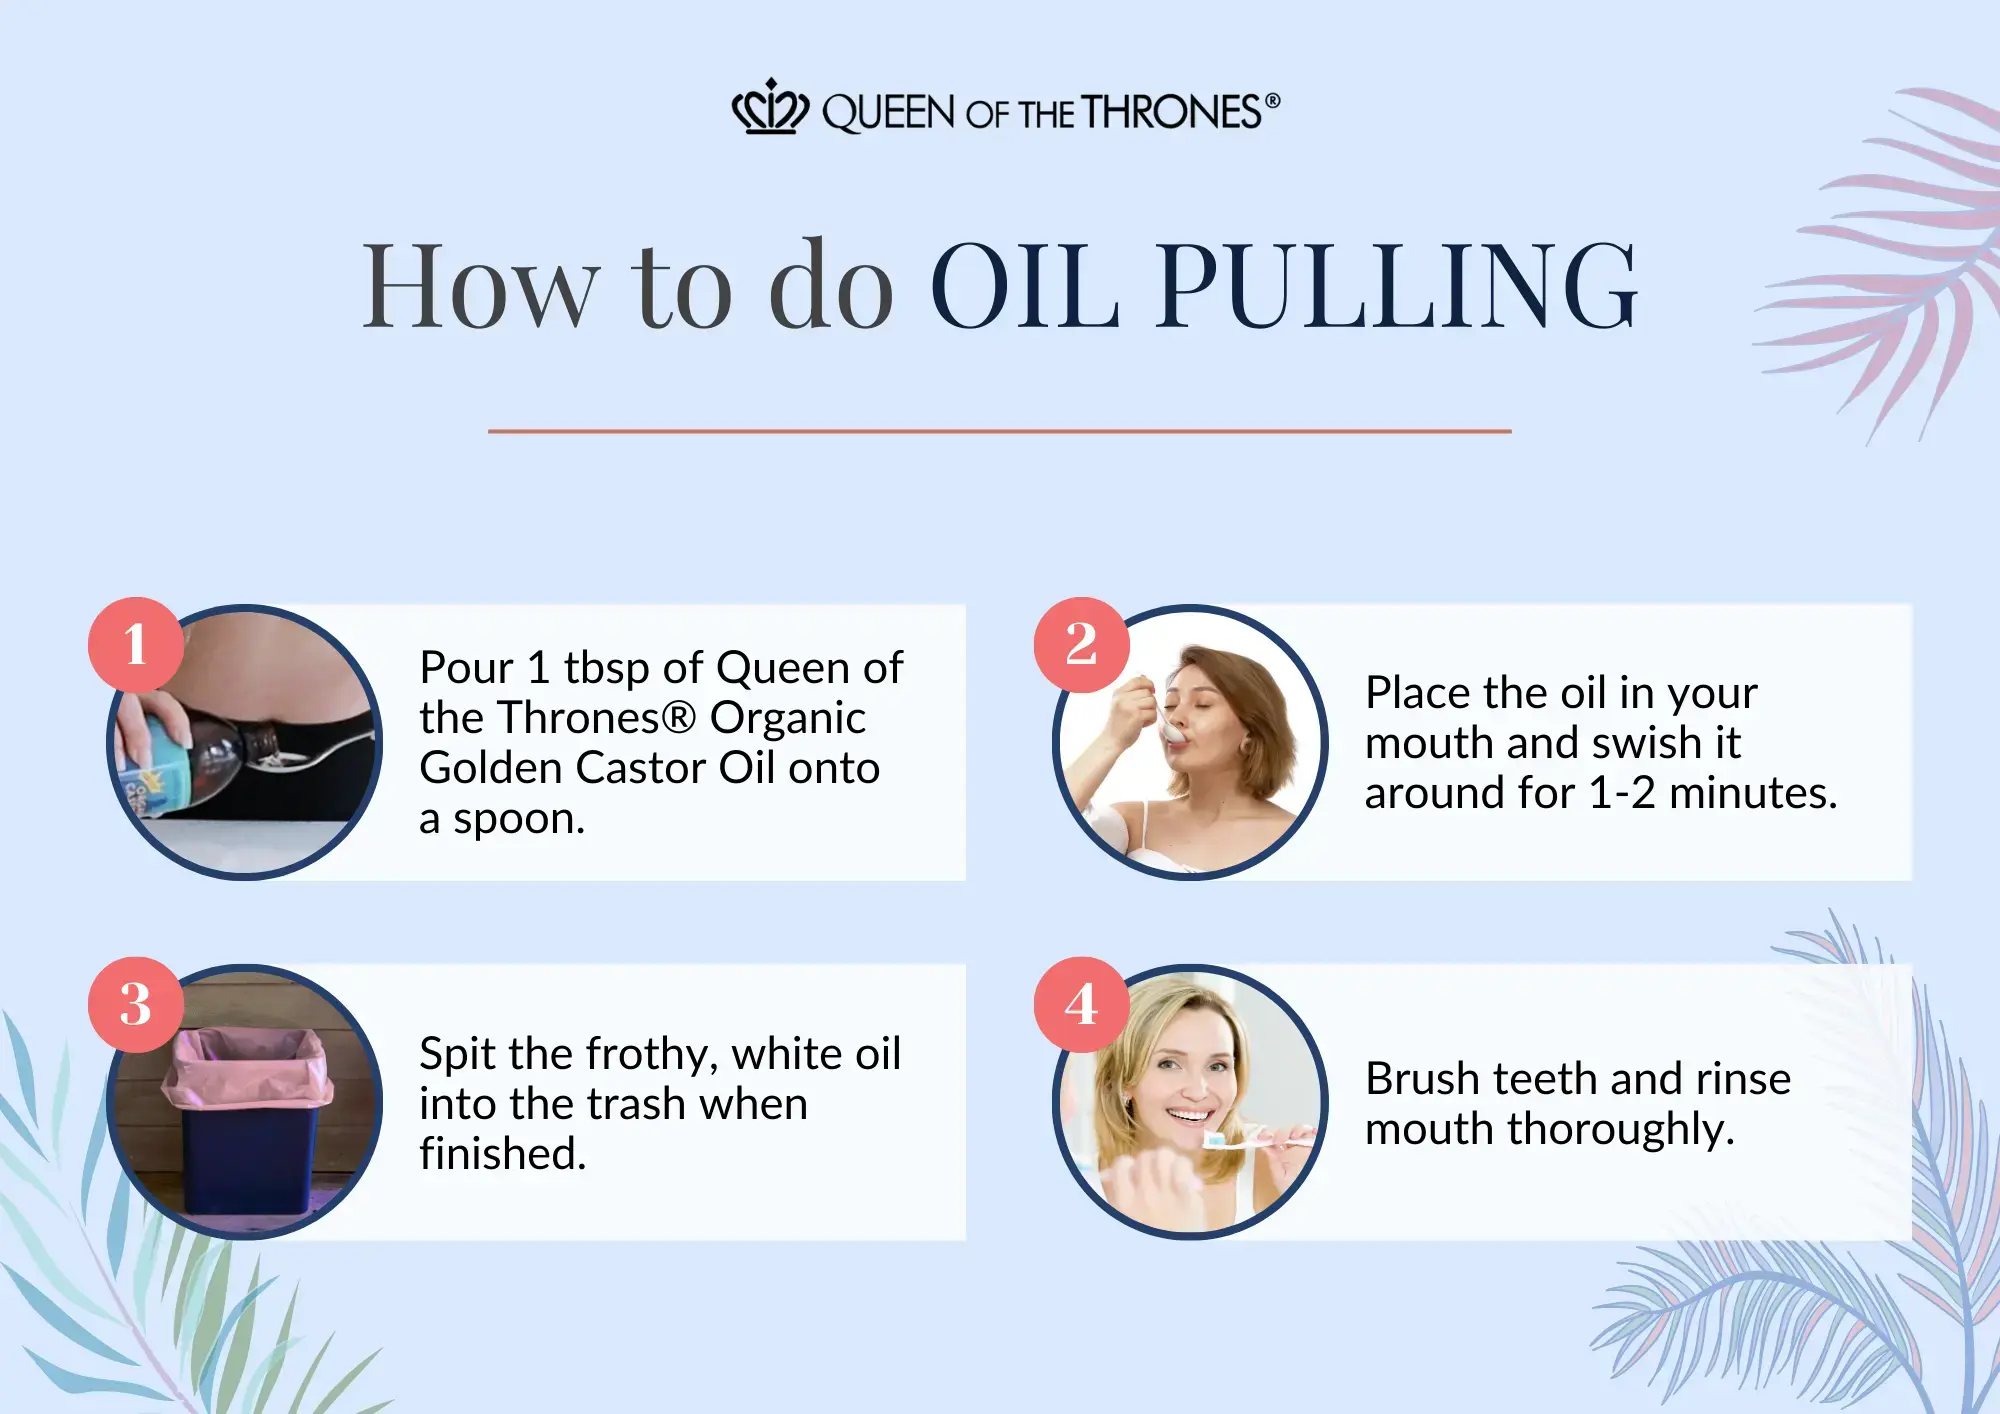 Queen-of-the-Thrones-how-to-do-Castor-Oil-pulling.